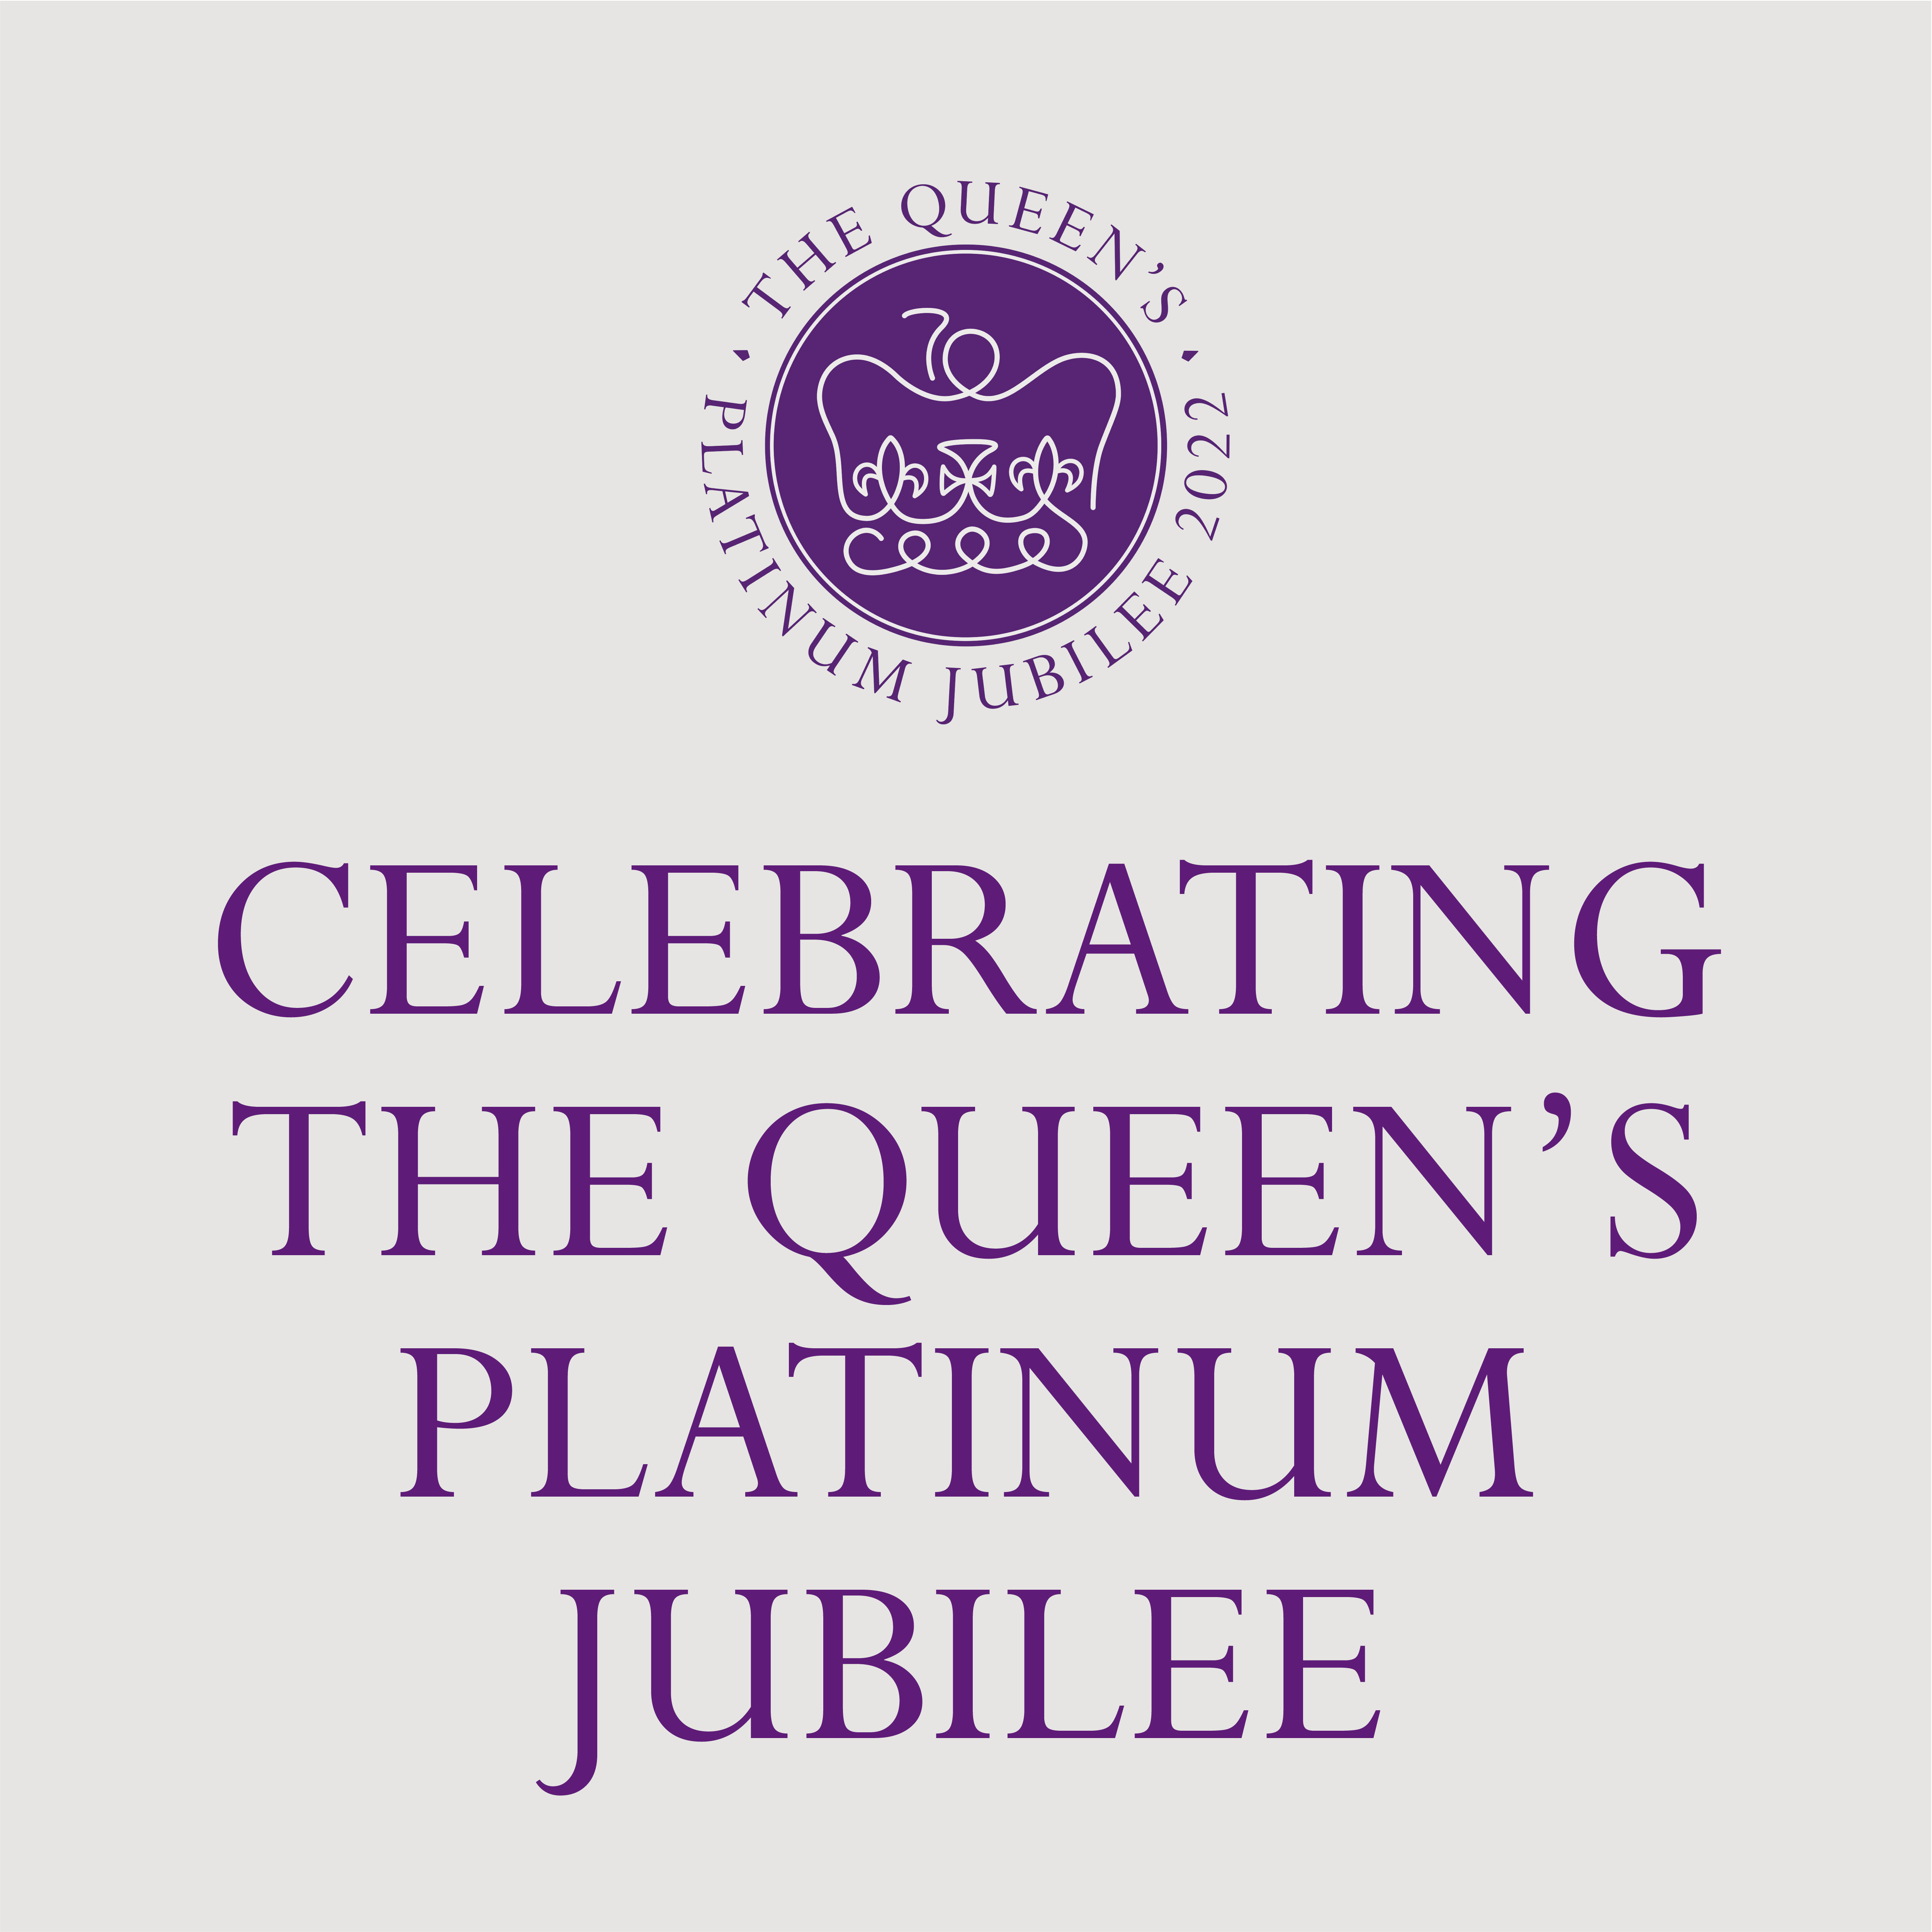 Test says celebrating the Queens platinum jubilee